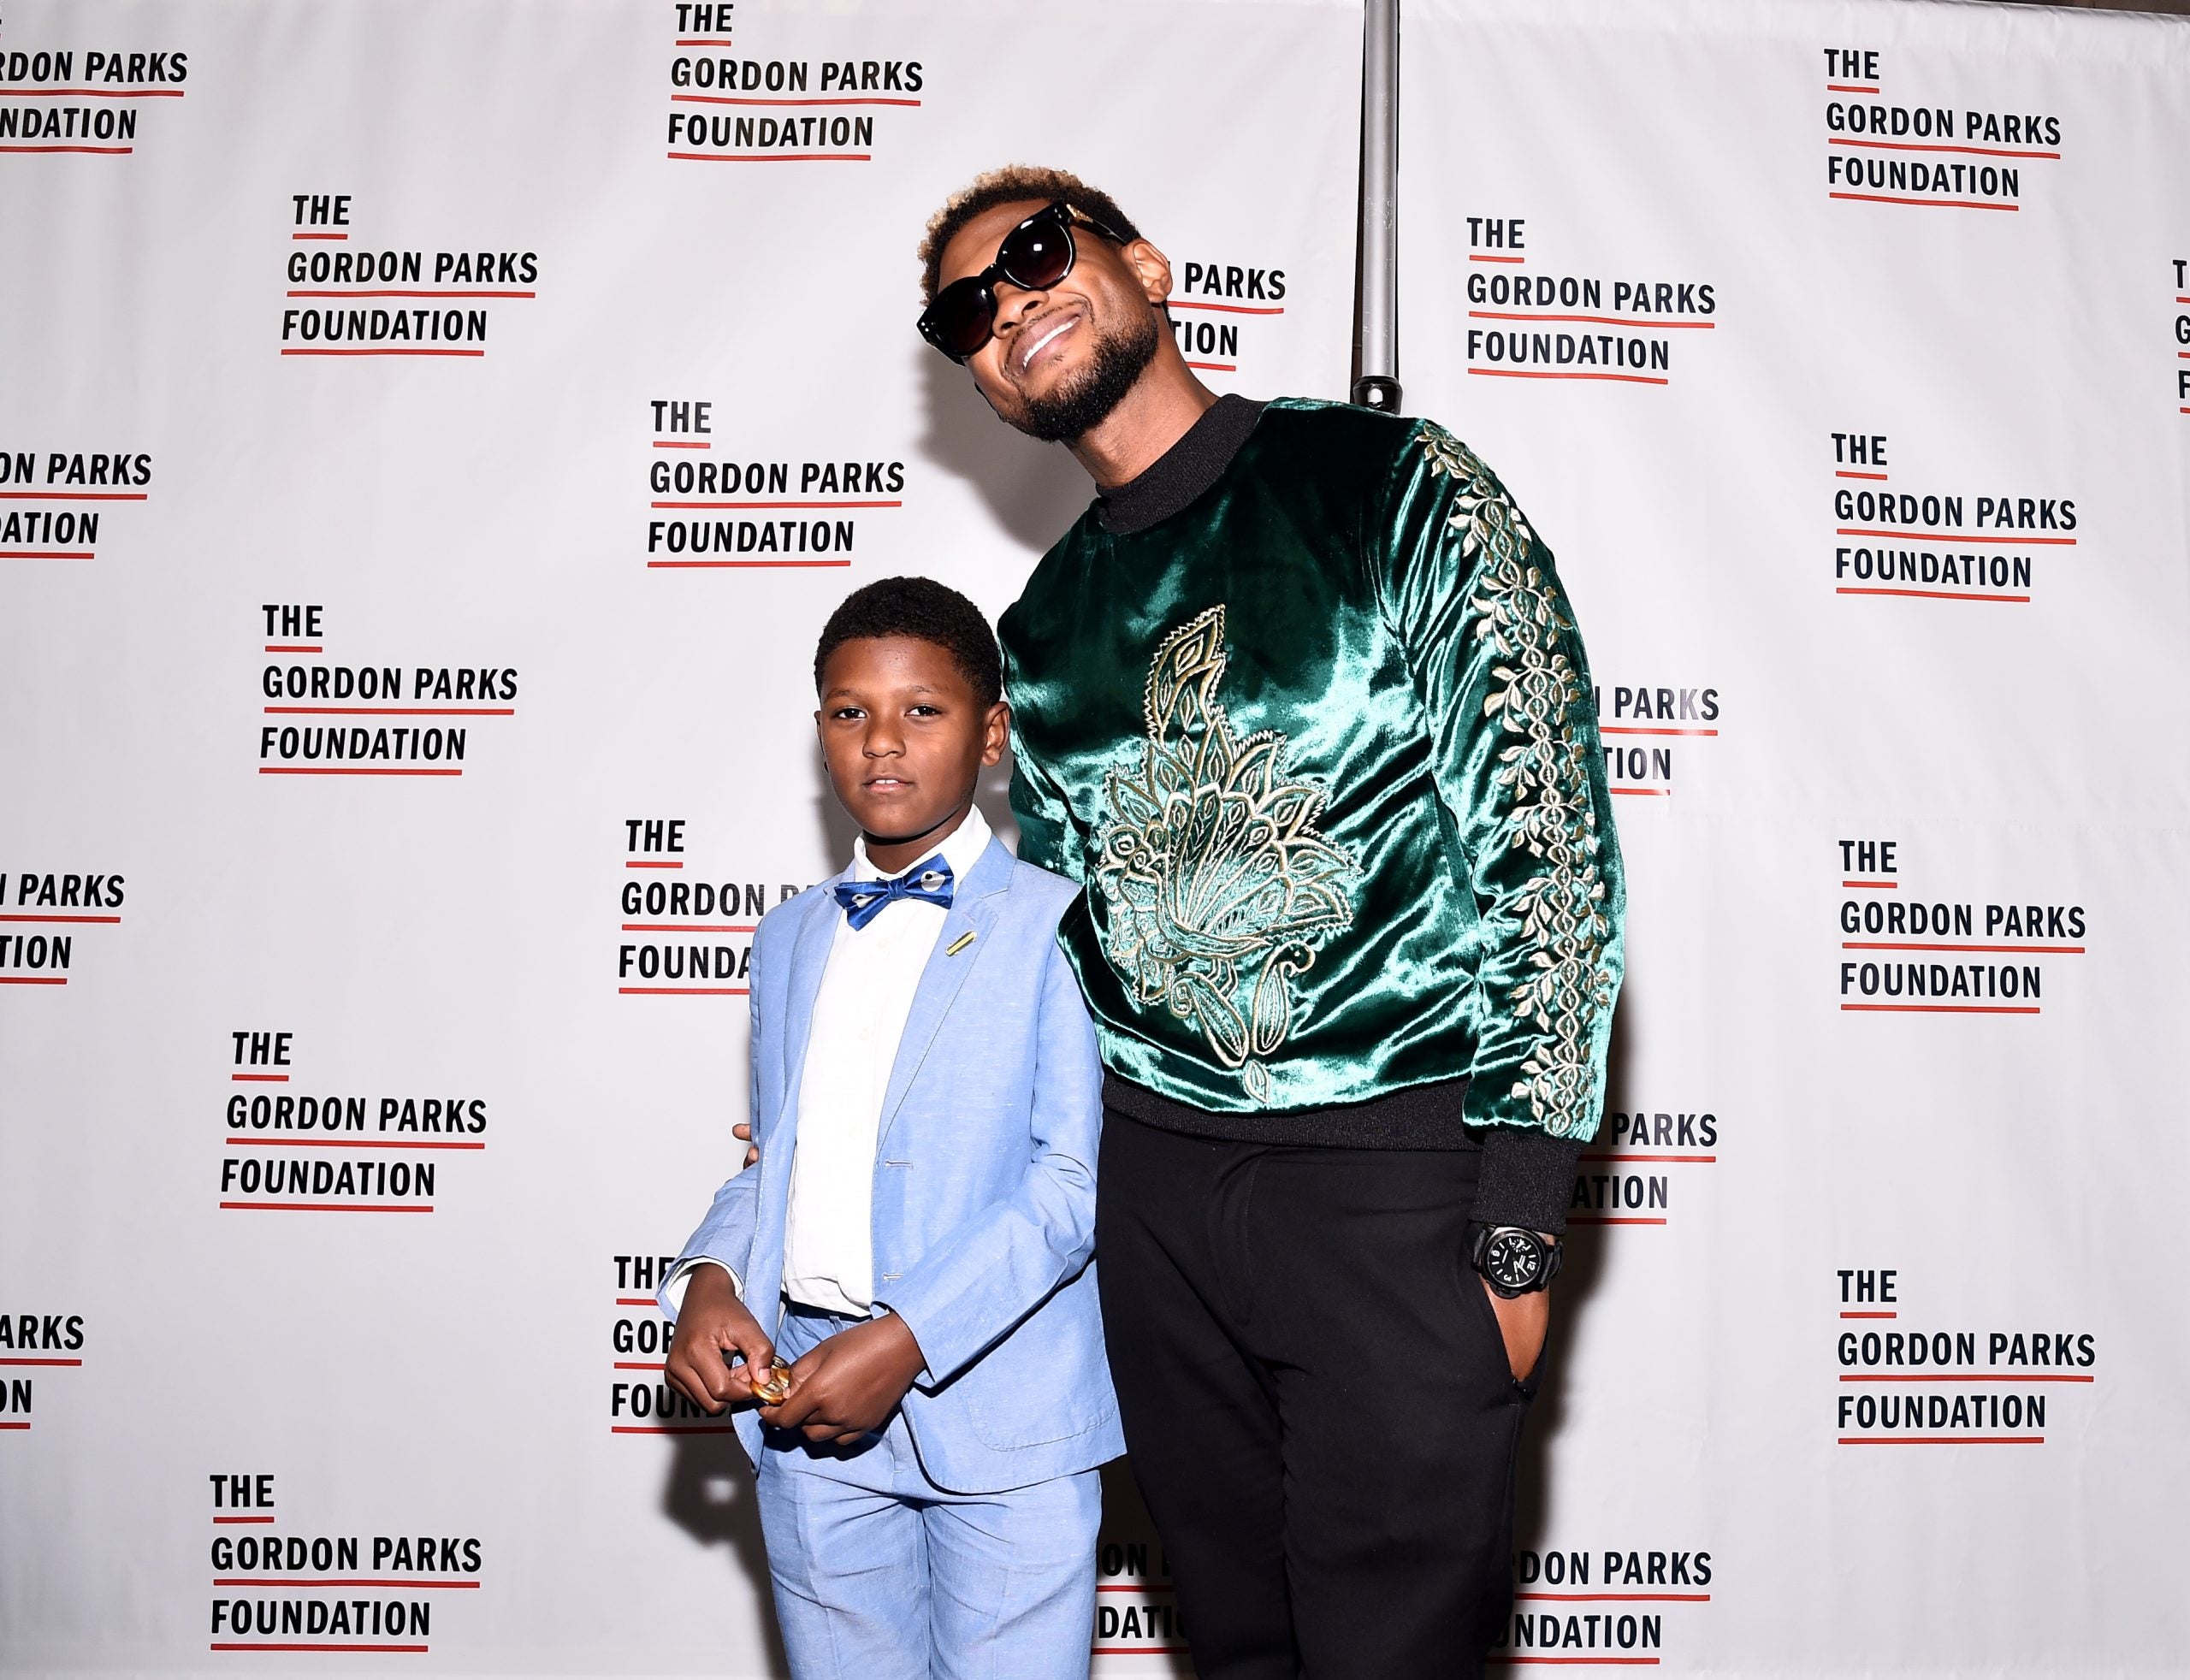 Where Did The Time Go? Photos Of Usher And His Sons From Over The Years